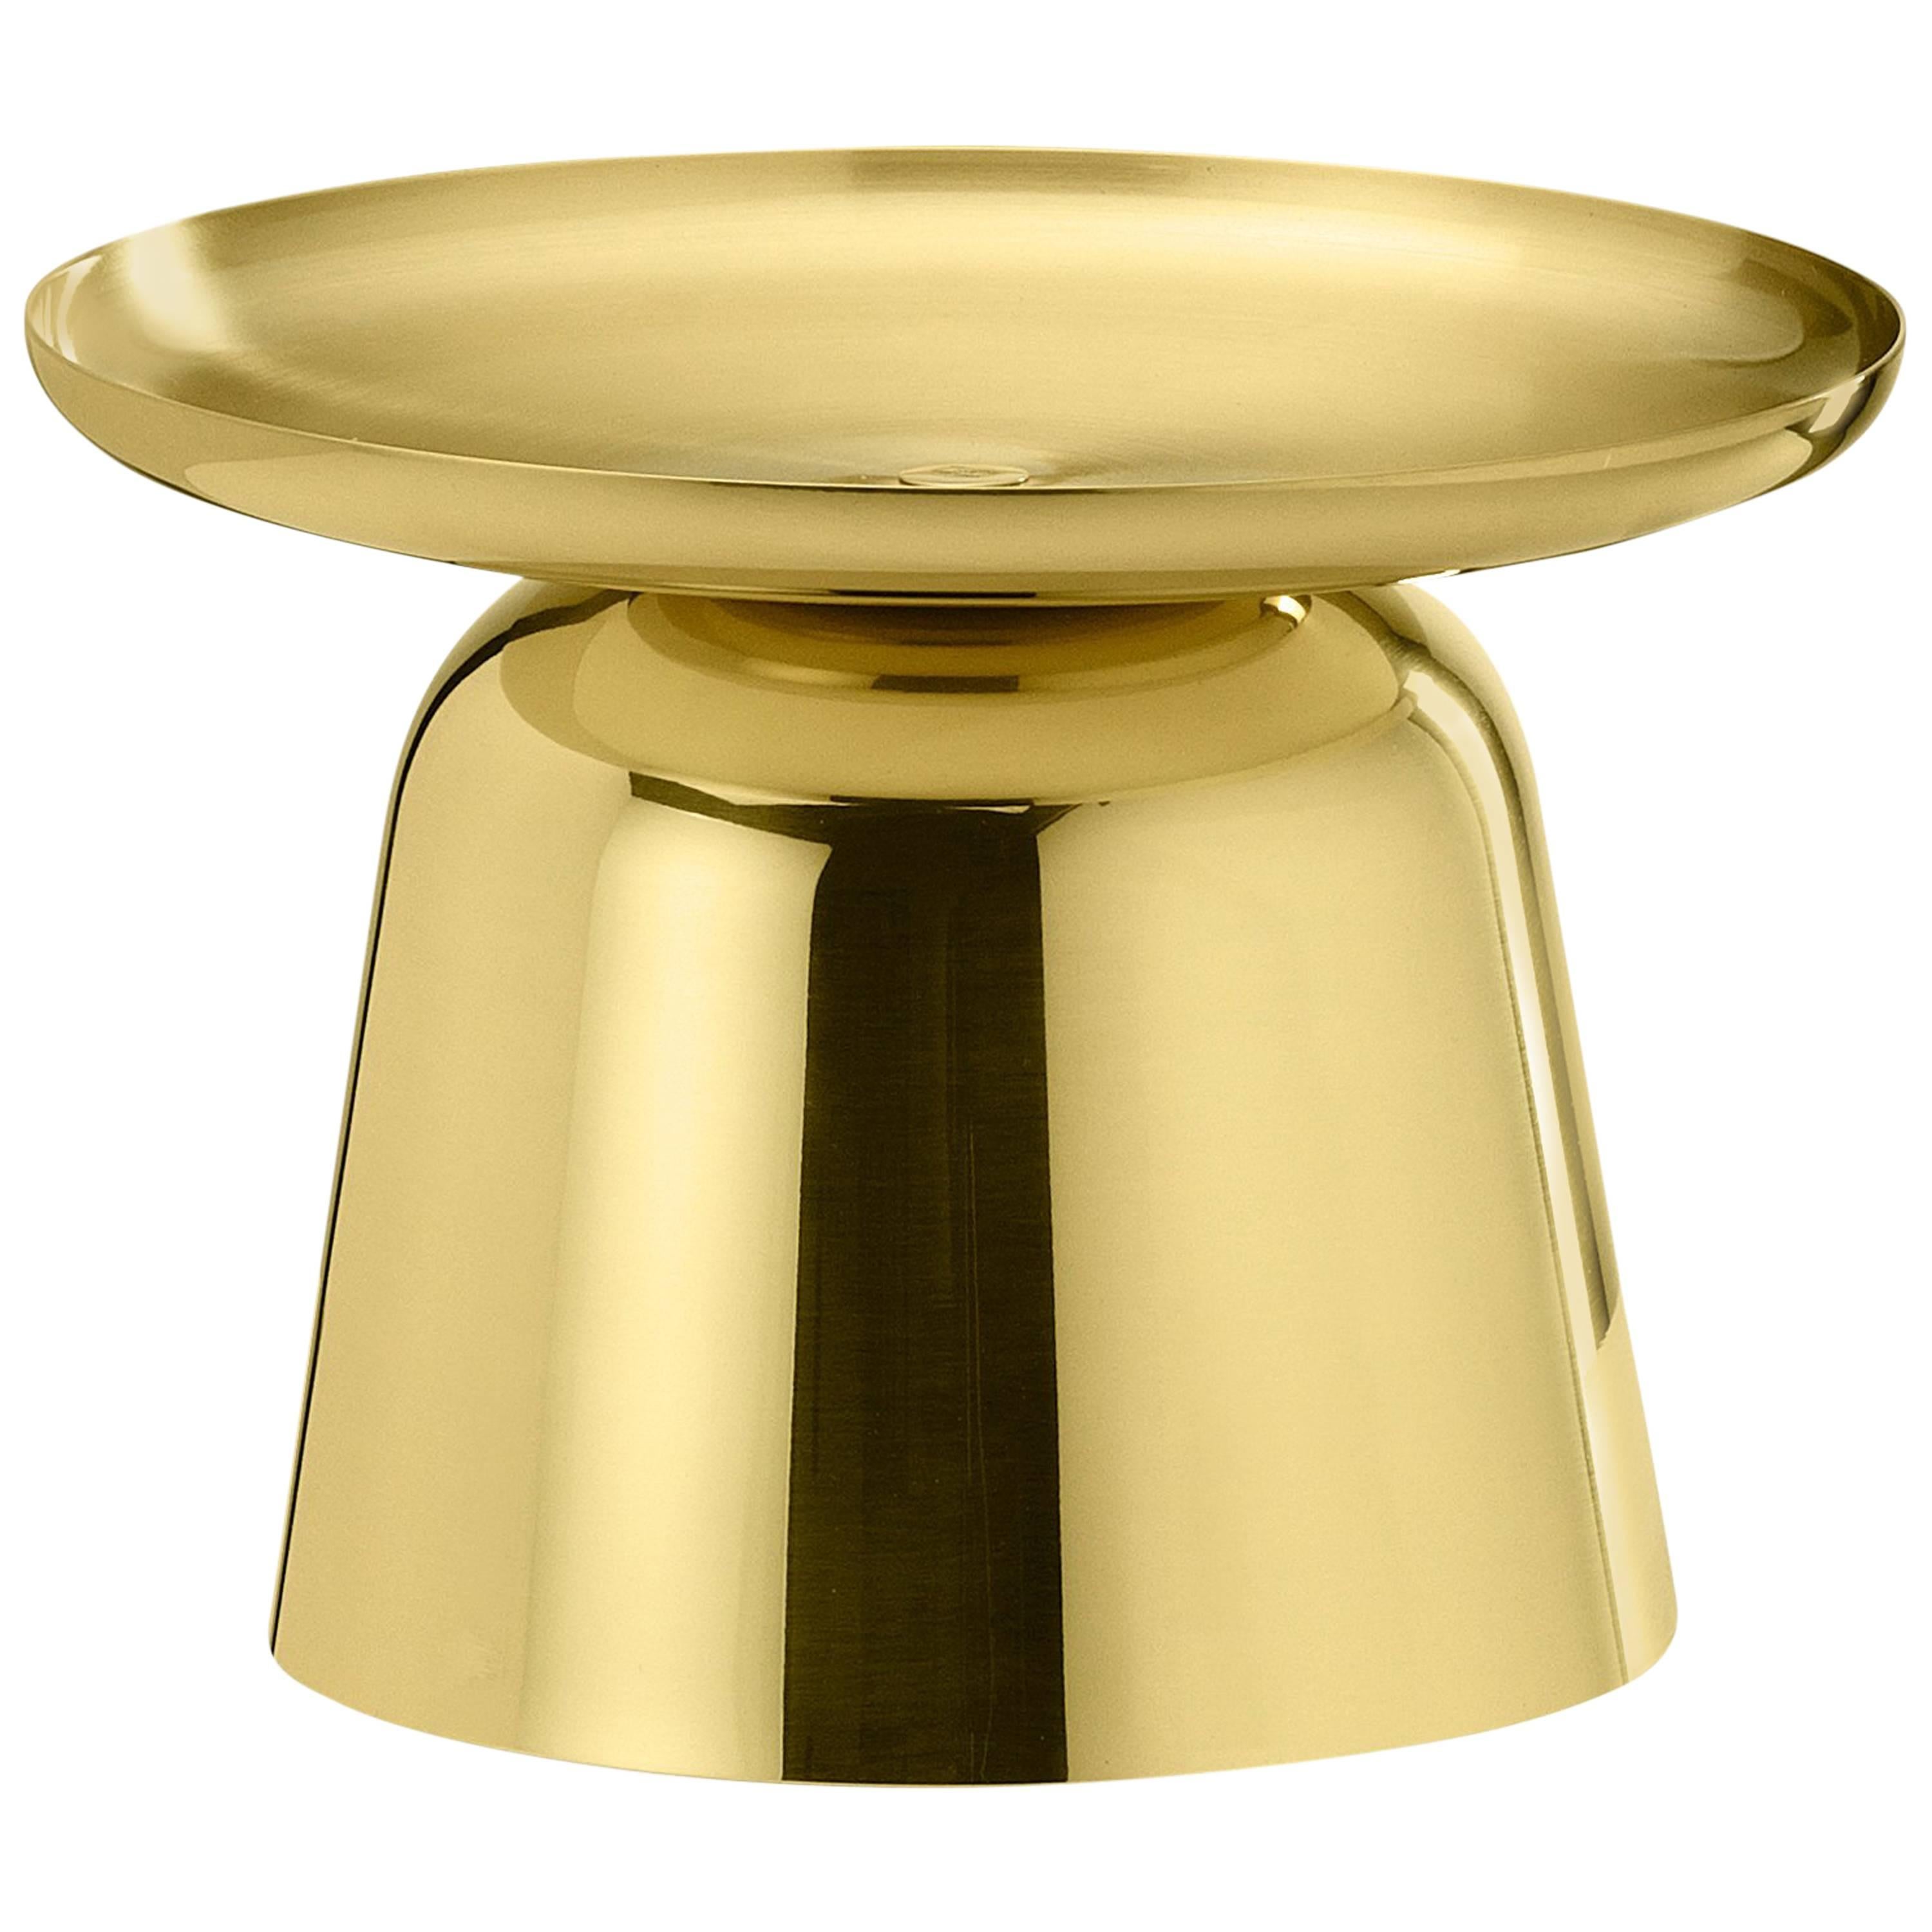 Ghidini 1961 Gil & Luc Small Vase in Polished Brass